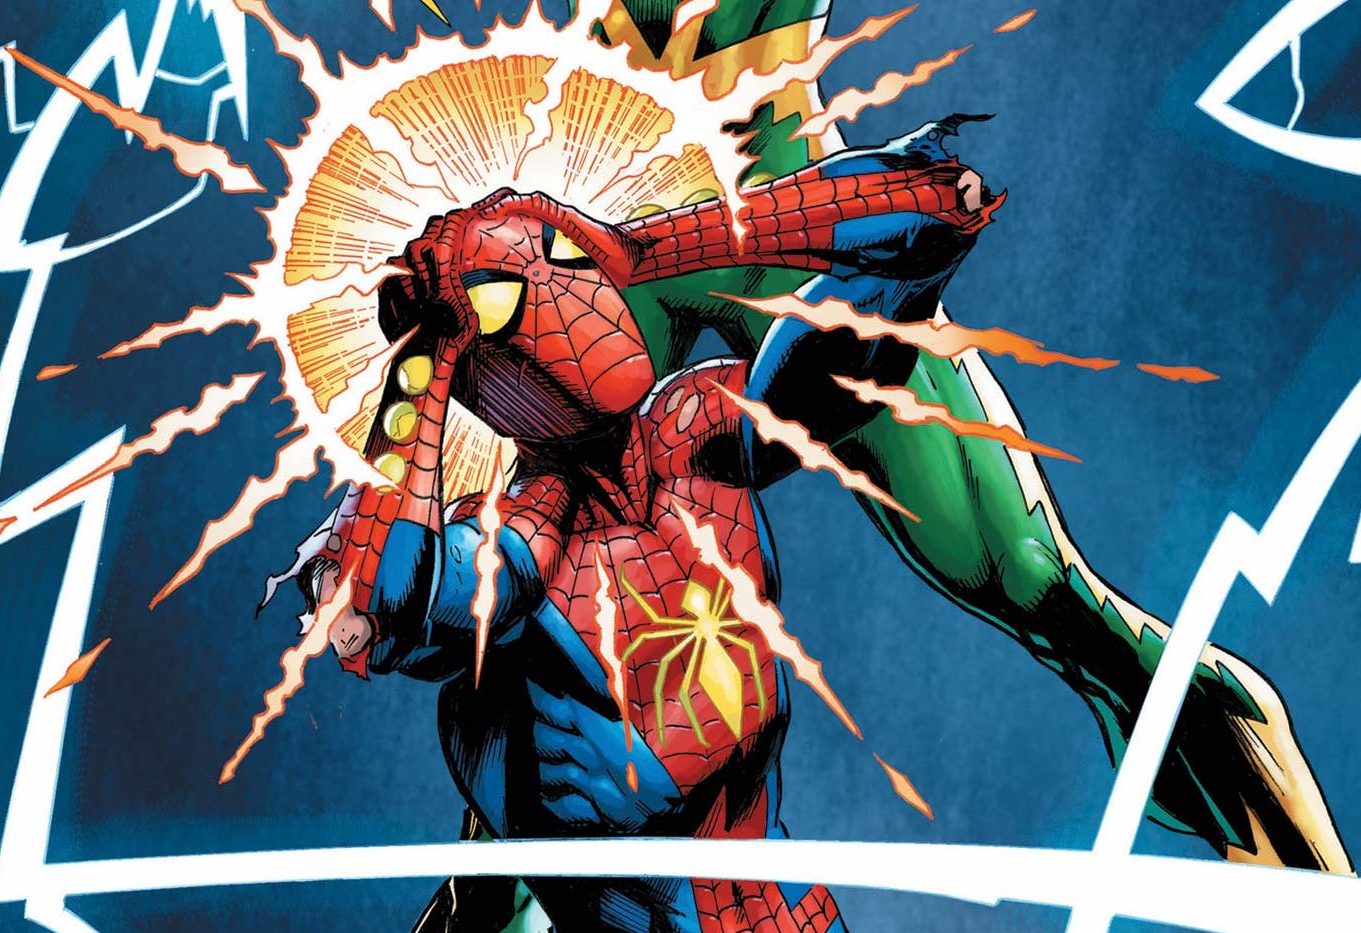 'Spider-Man' #9 shows Slott and Bagley have the best handle on Spider-Man at Marvel